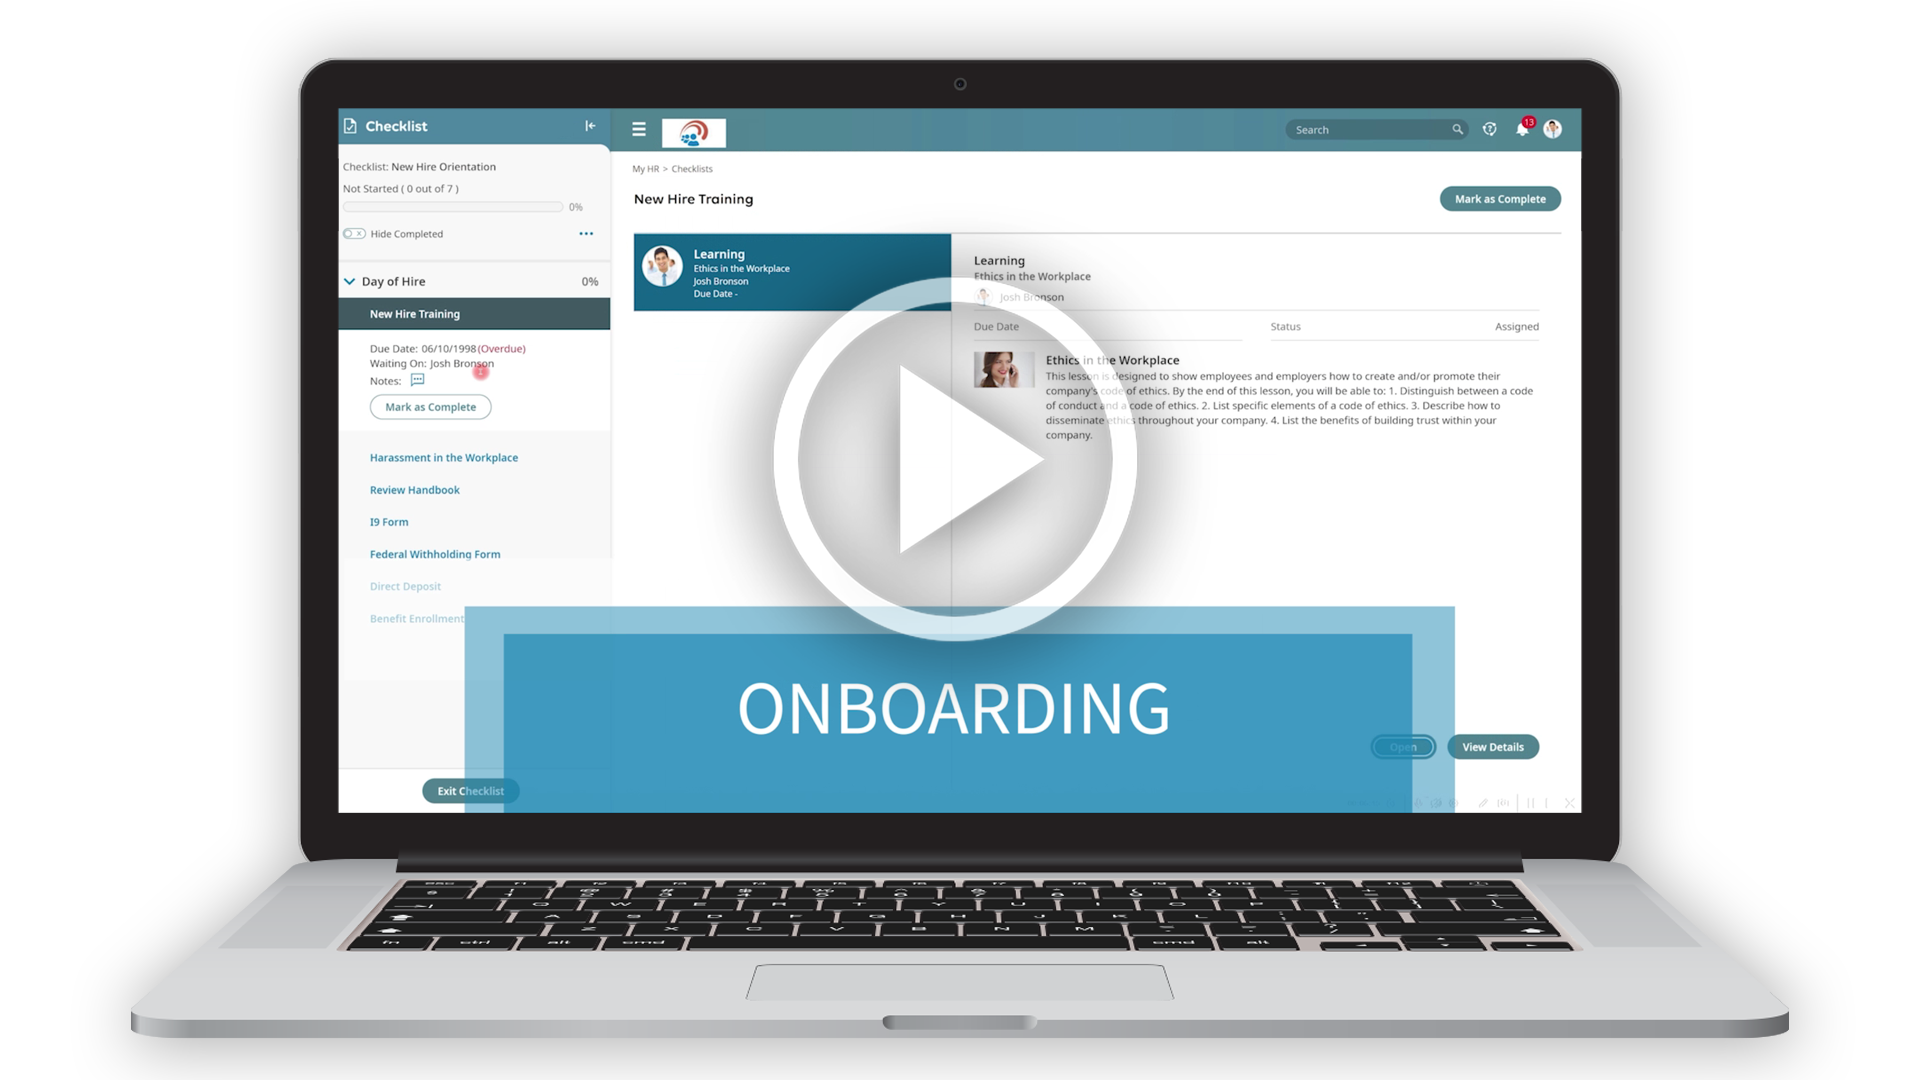 Onboarding Software Demo Video Thumbnail